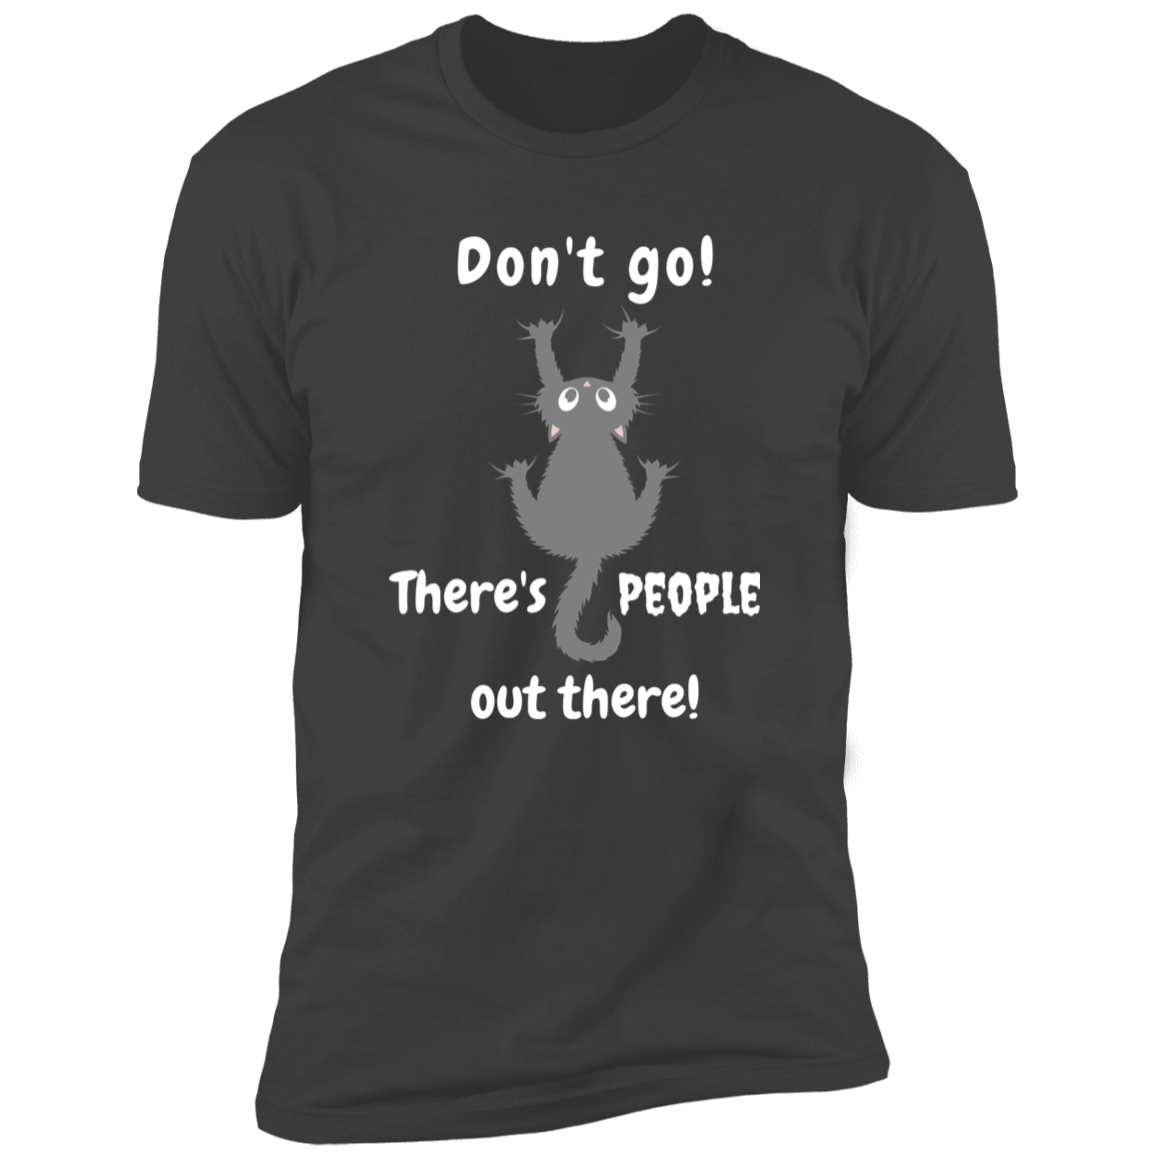 Don't Go! There are People Out there Shirt, funny cat shirt for humans, cat mom and cat dad shirt, in heavy metal gray